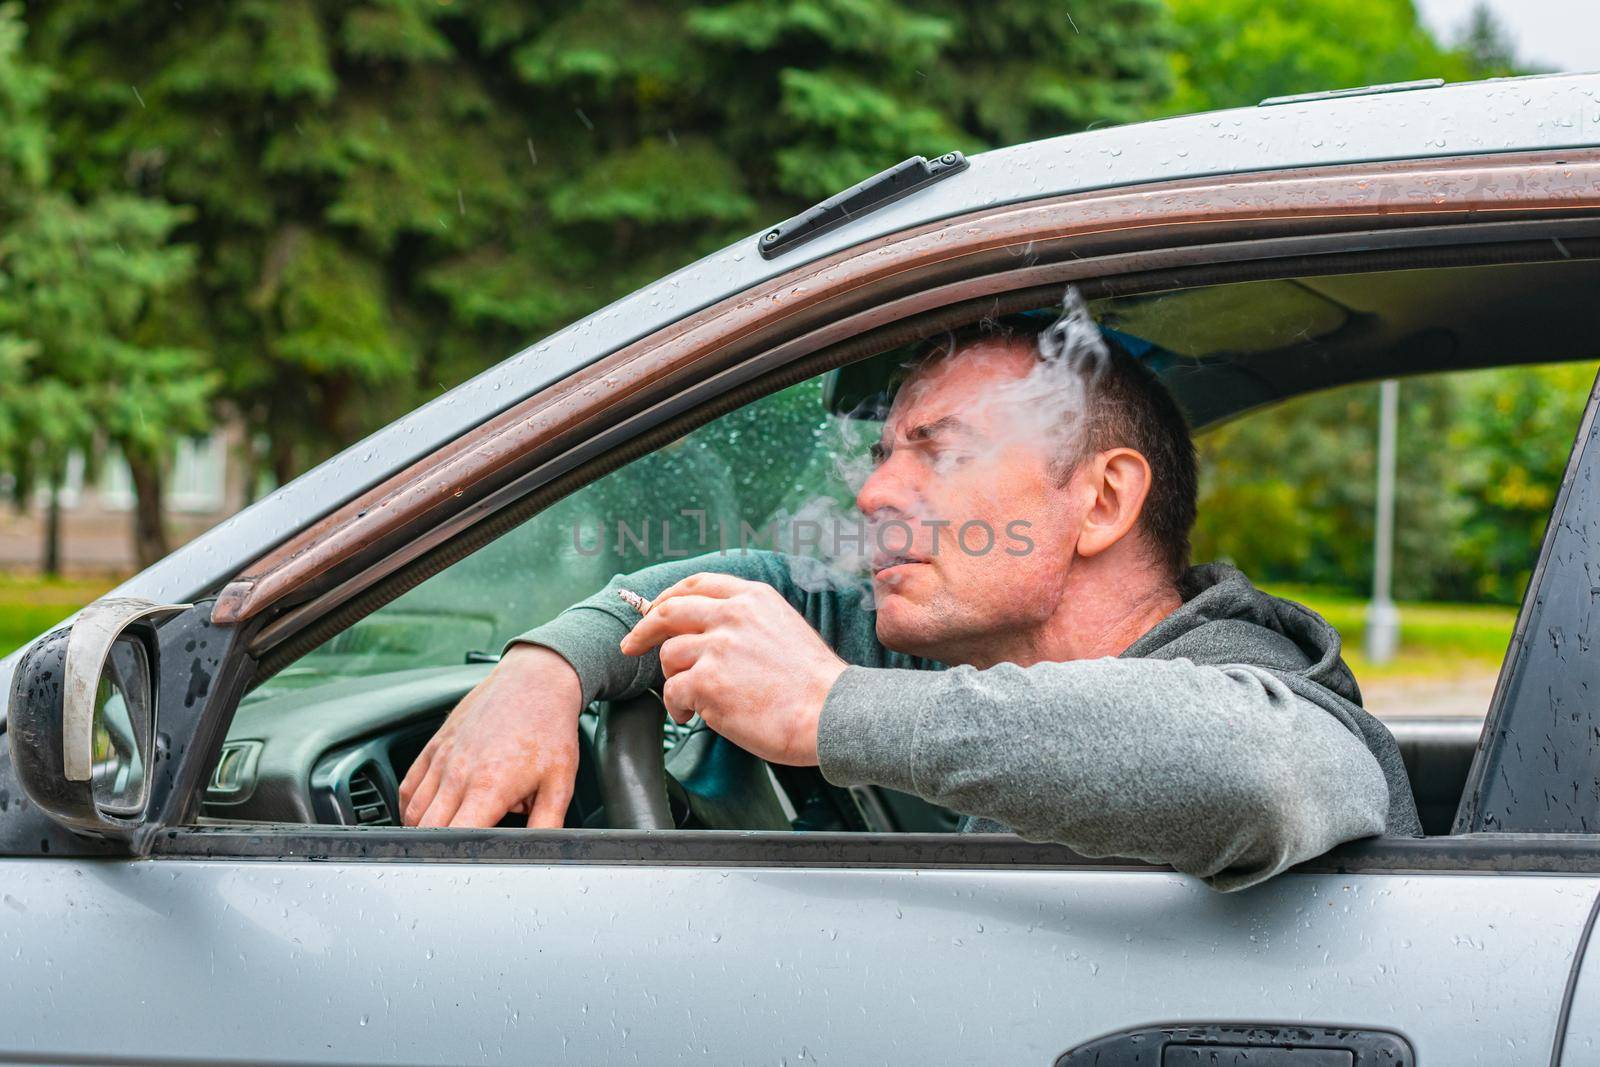 The driver enjoys smoking while driving his car by Skaron